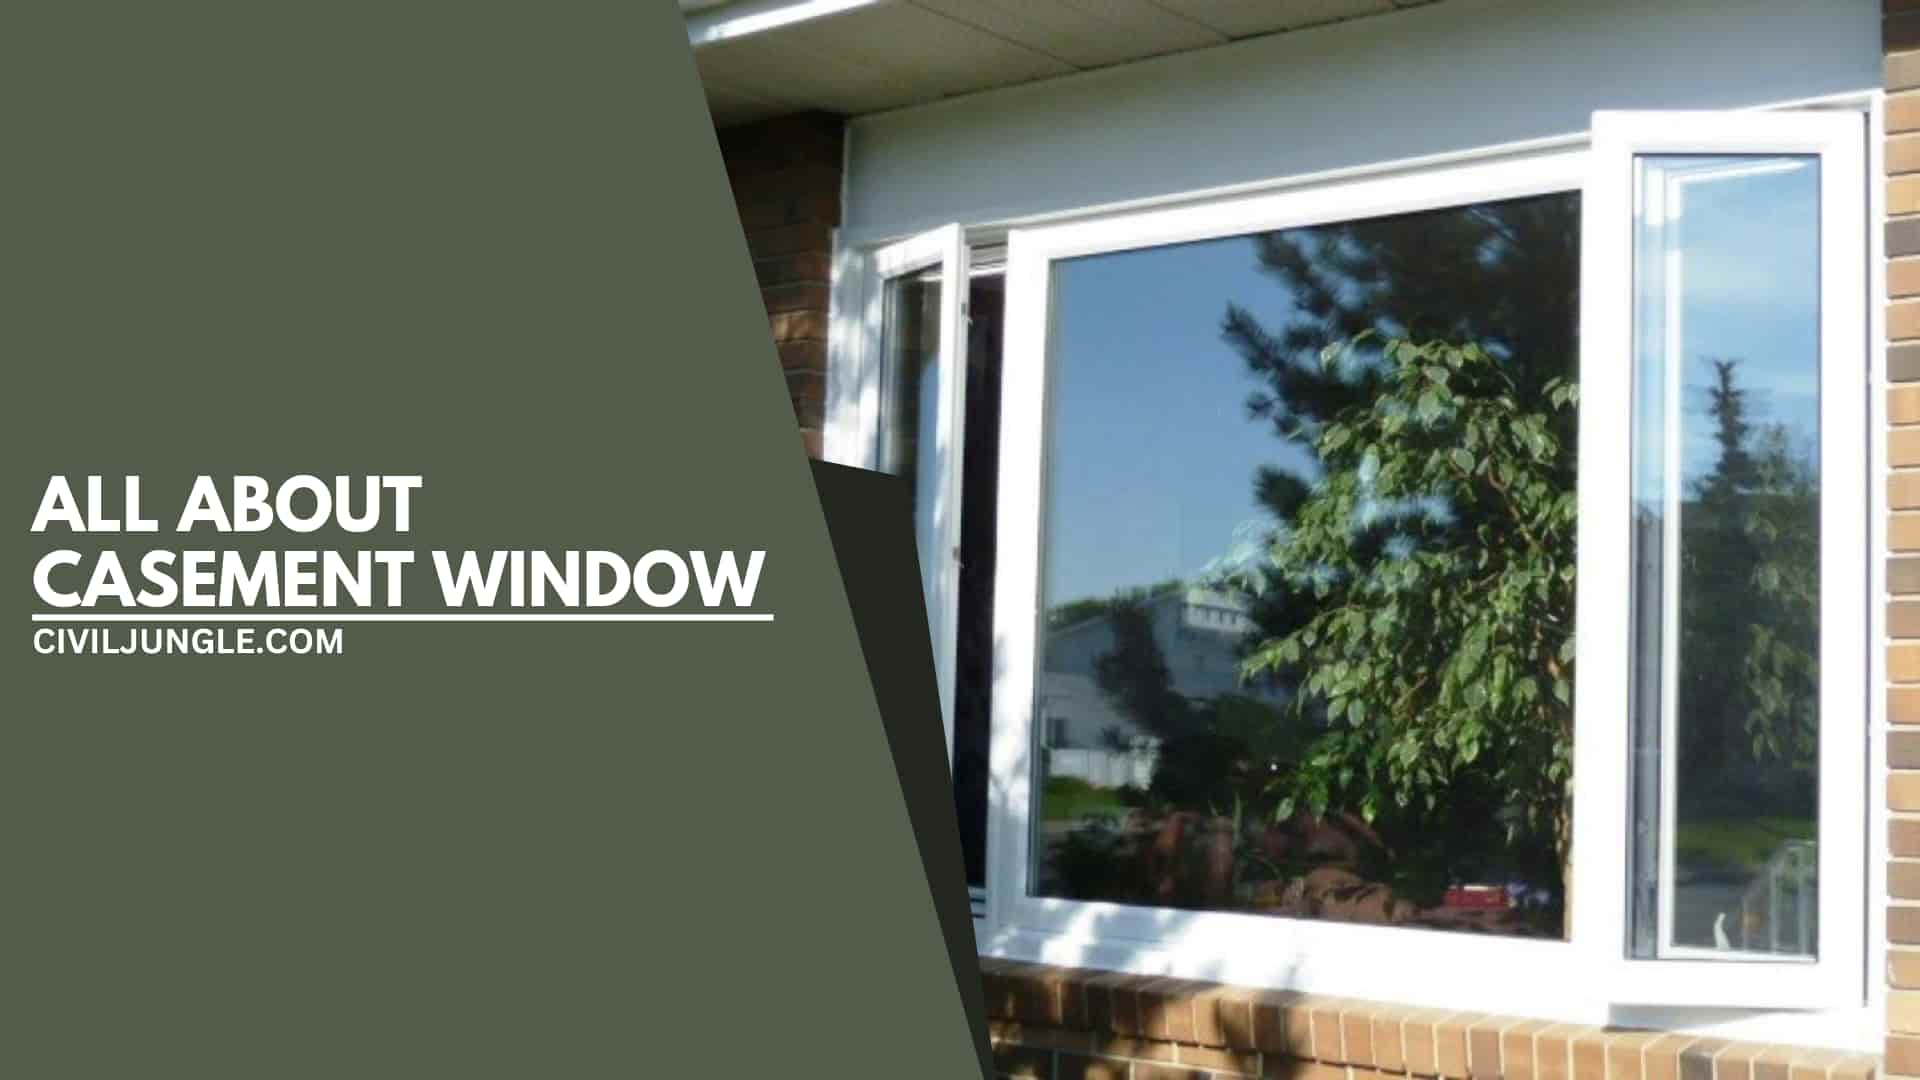 All About Casement Window